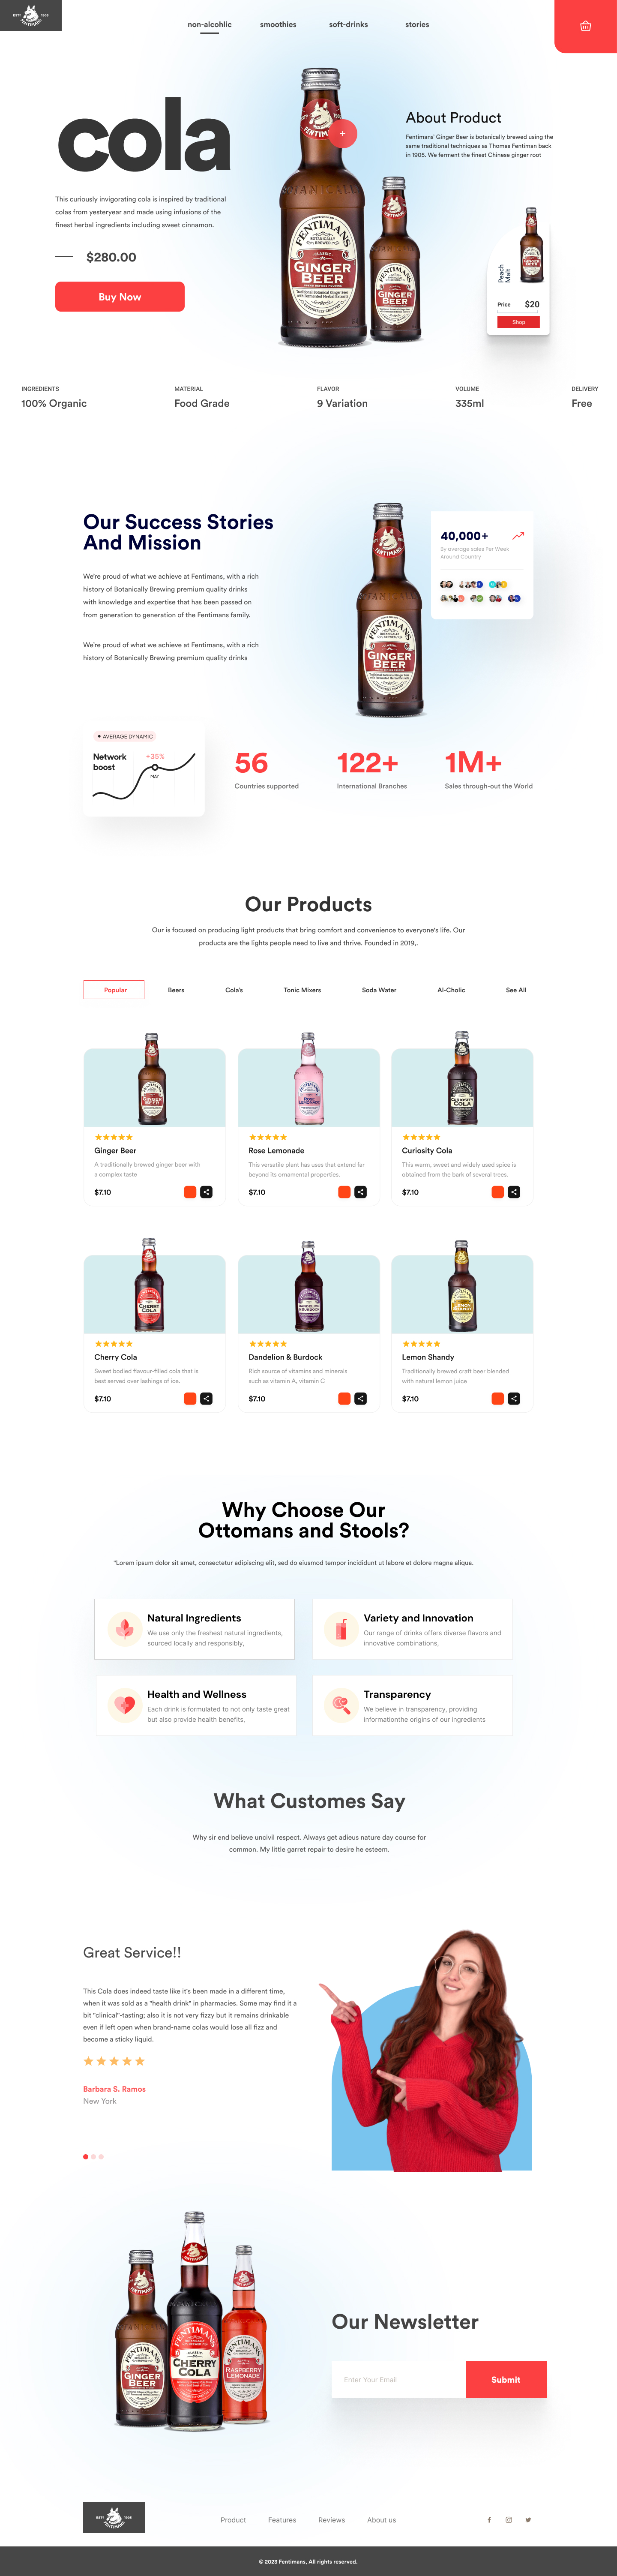 Full Preview of Cola - Store Design for Cold Drinks